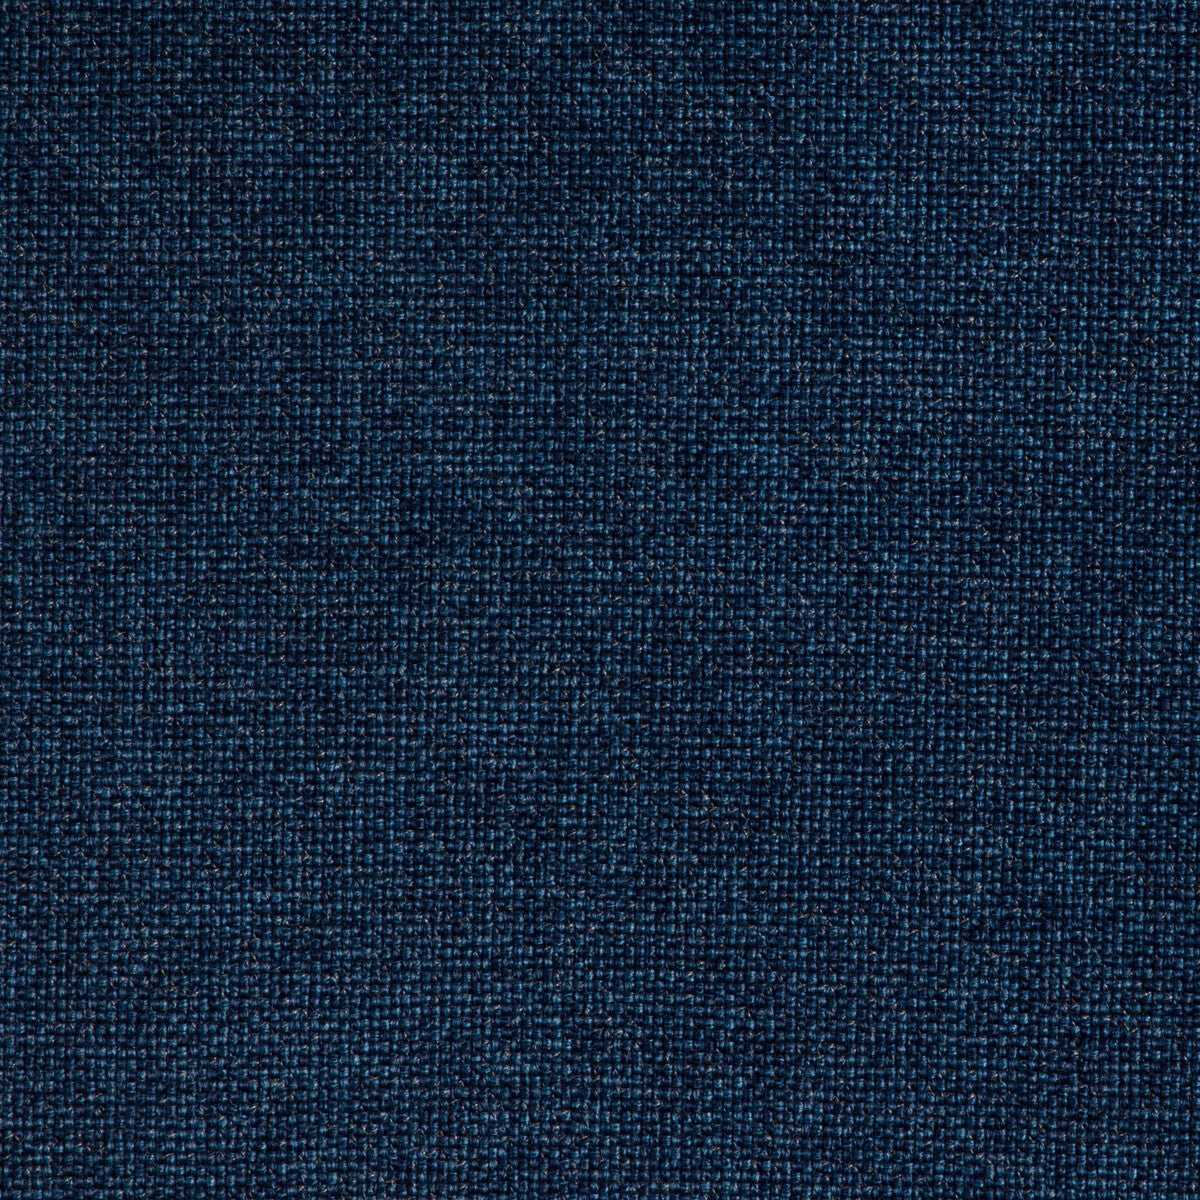 Les Canevas Plain fabric in blue color - pattern 8024114.5.0 - by Brunschwig &amp; Fils in the Les Ensembliers L&